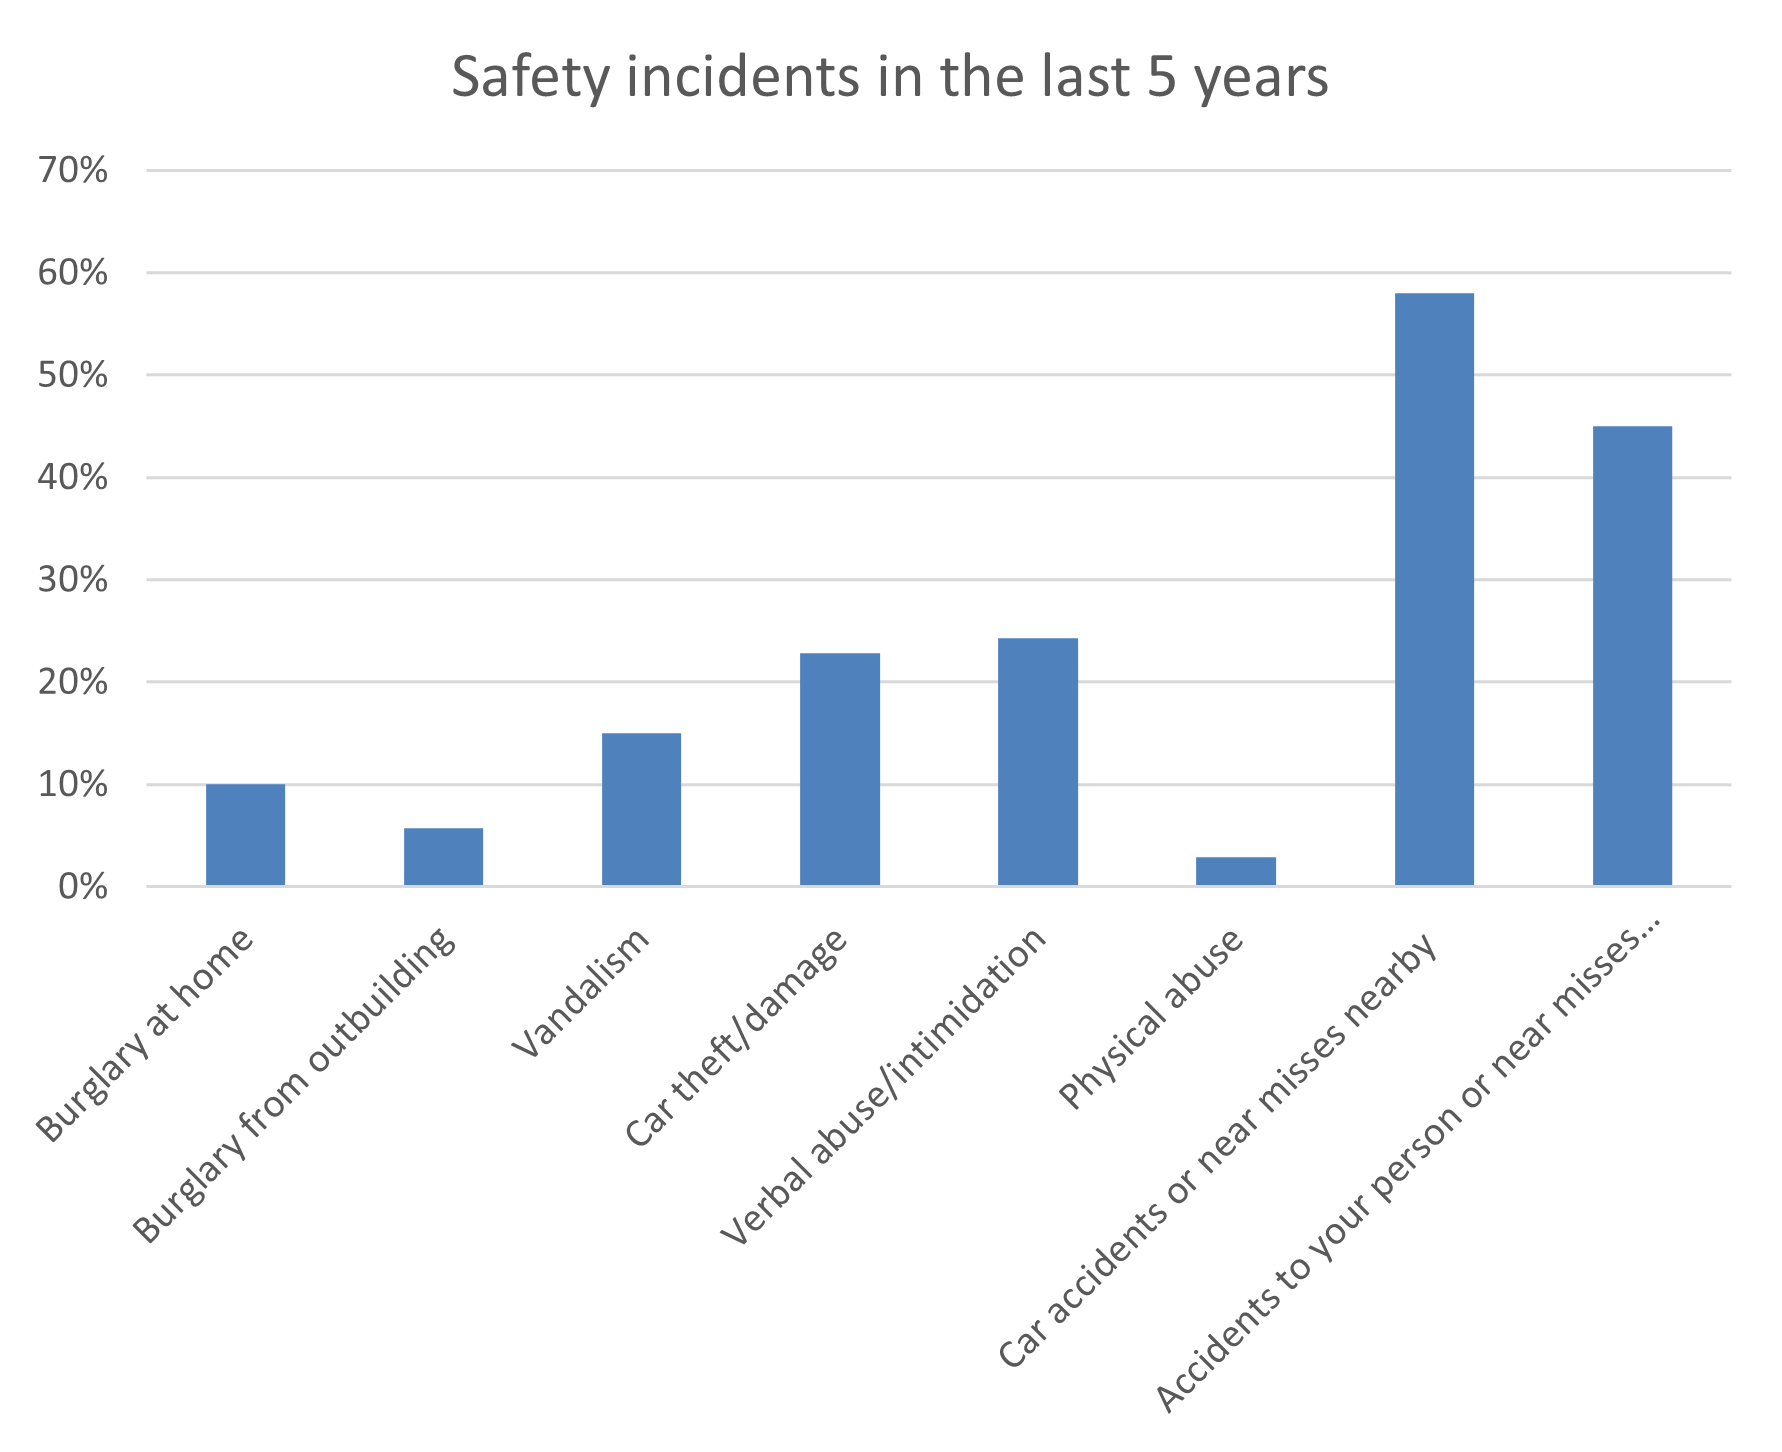 Safety incidents in the last 5 years